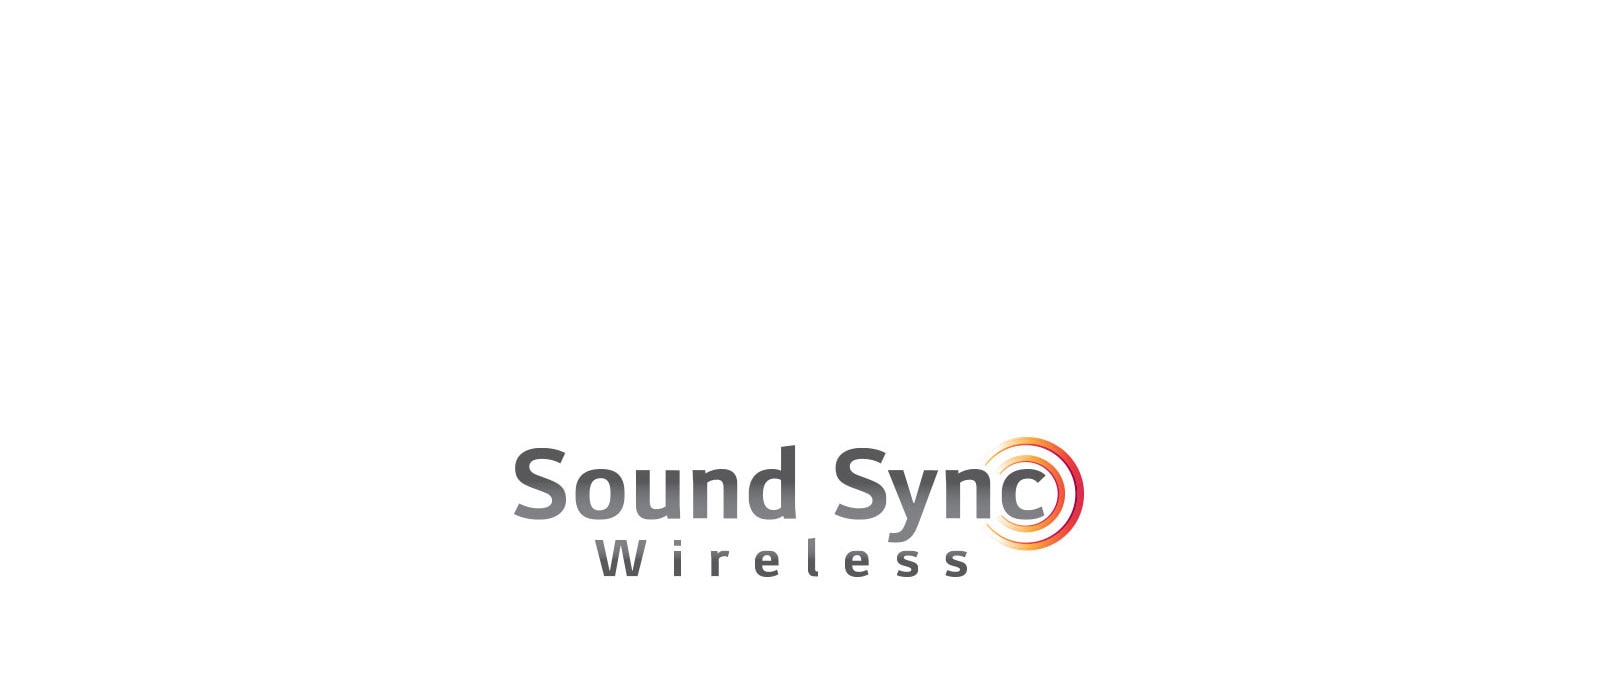 More exciting sound from the TV (LG TV Sound Sync)1